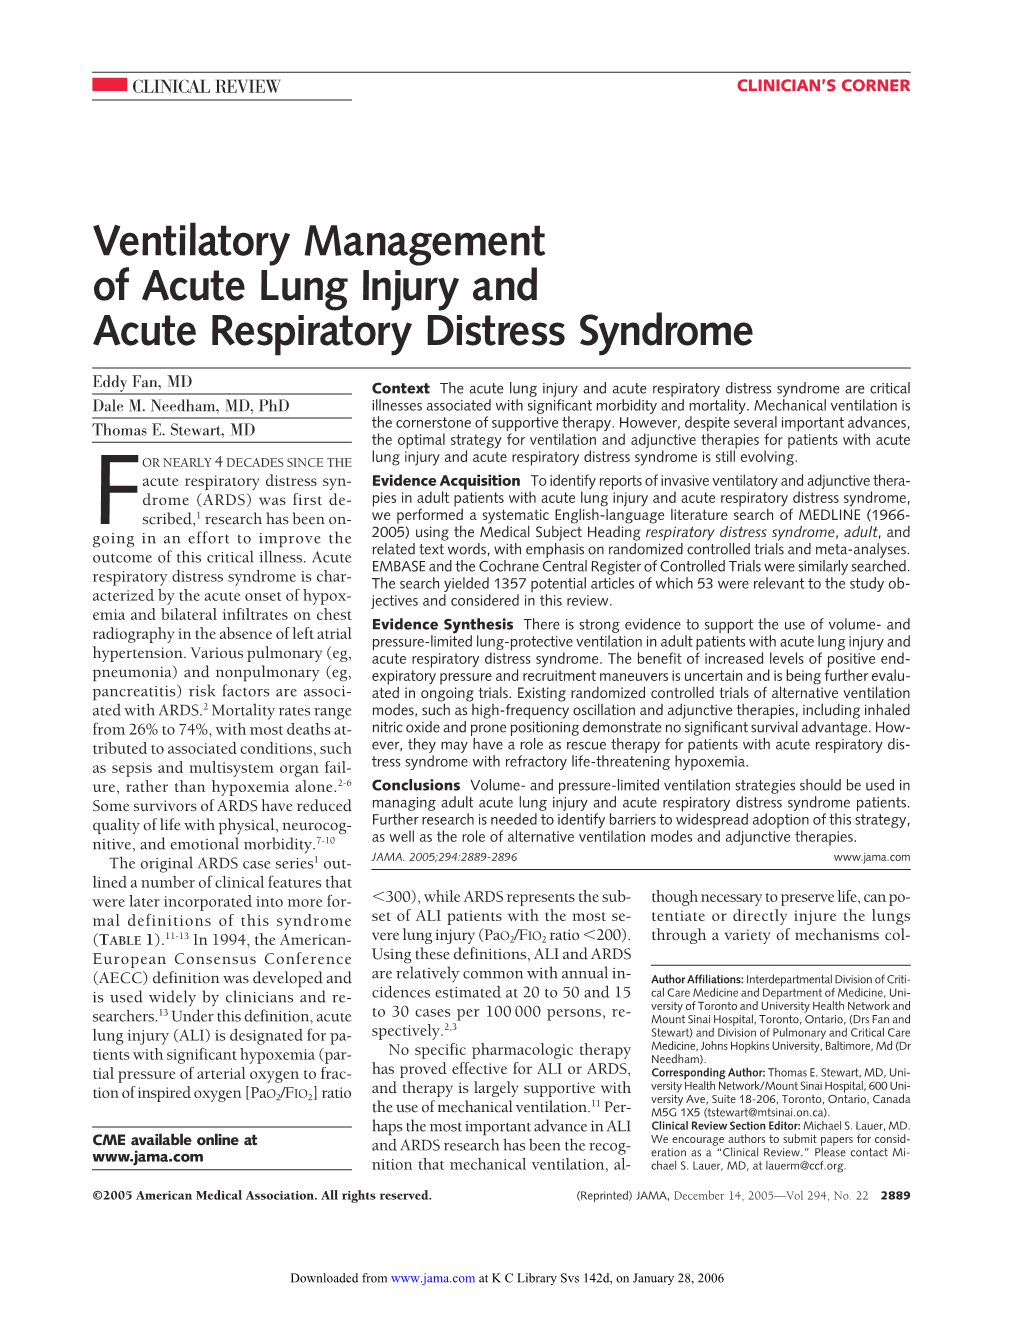 Ventilatory Management of Acute Lung Injury and Acute Respiratory Distress Syndrome